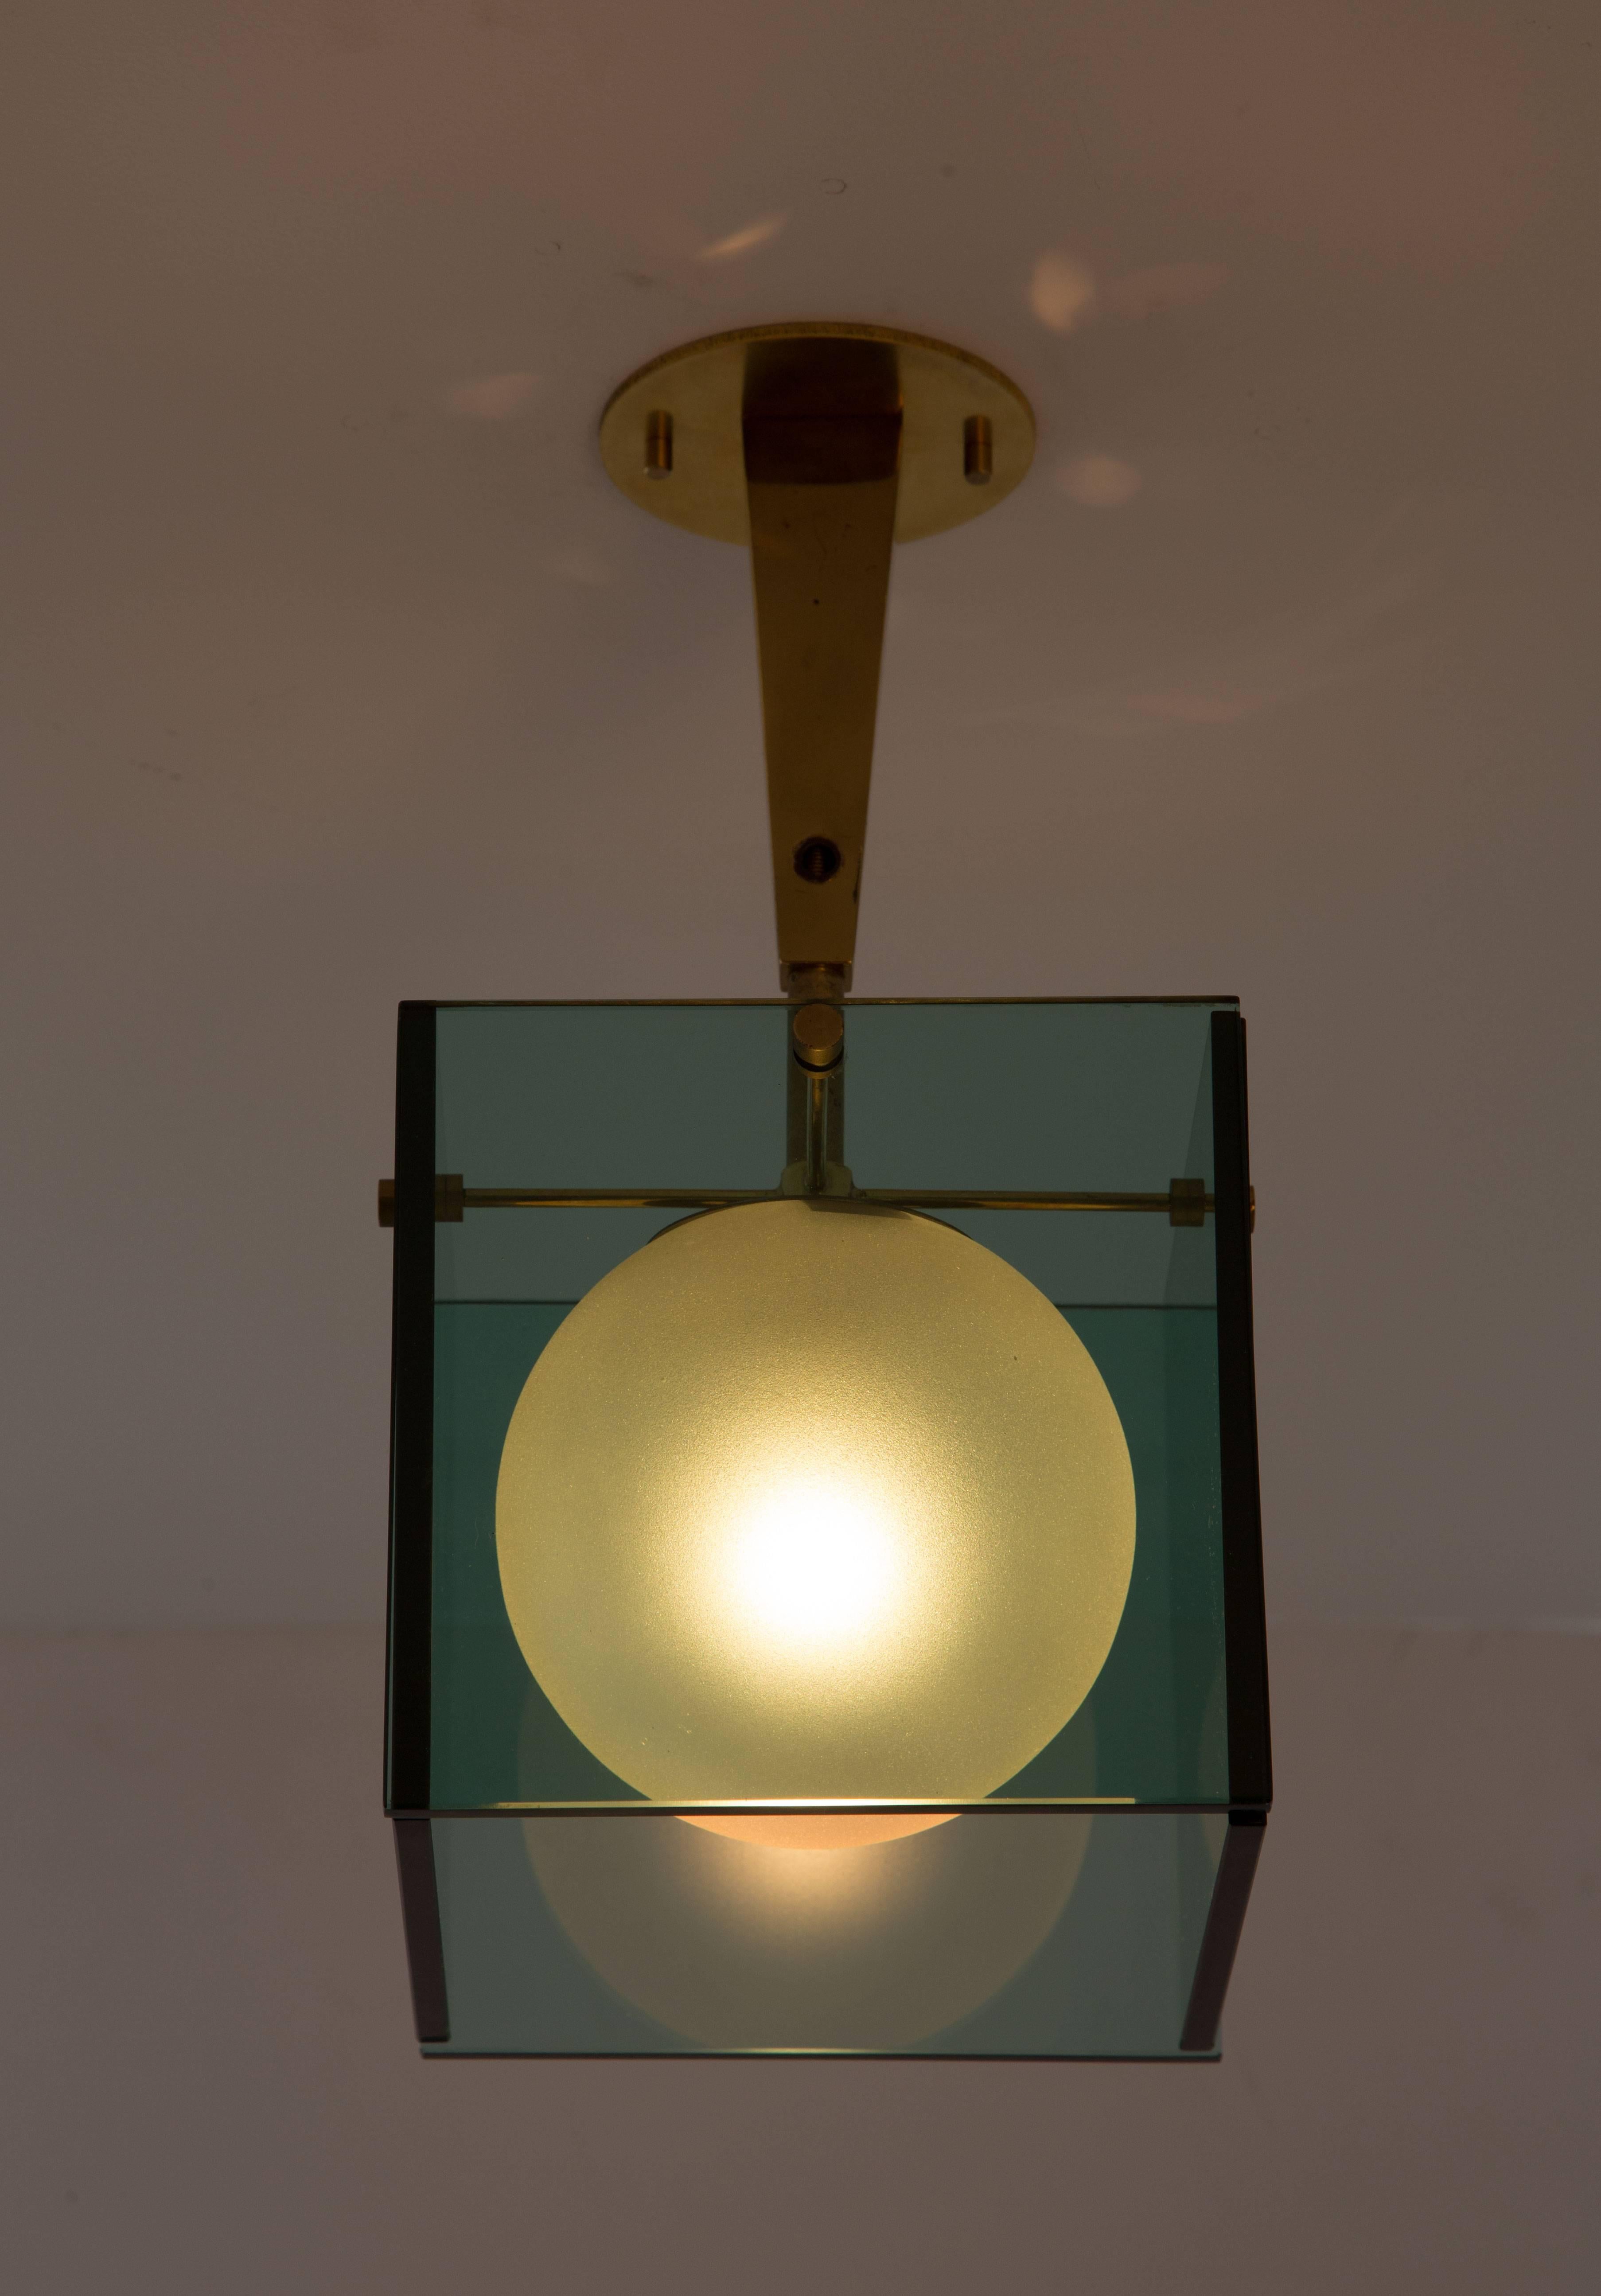 Flush mount ceiling light made of green glass with frosted, textured glass globe and brass hardware. Designed by Max Ingrand for Fontana Arte. Rewired. Custom canopy. E27 60w maximum bulb.